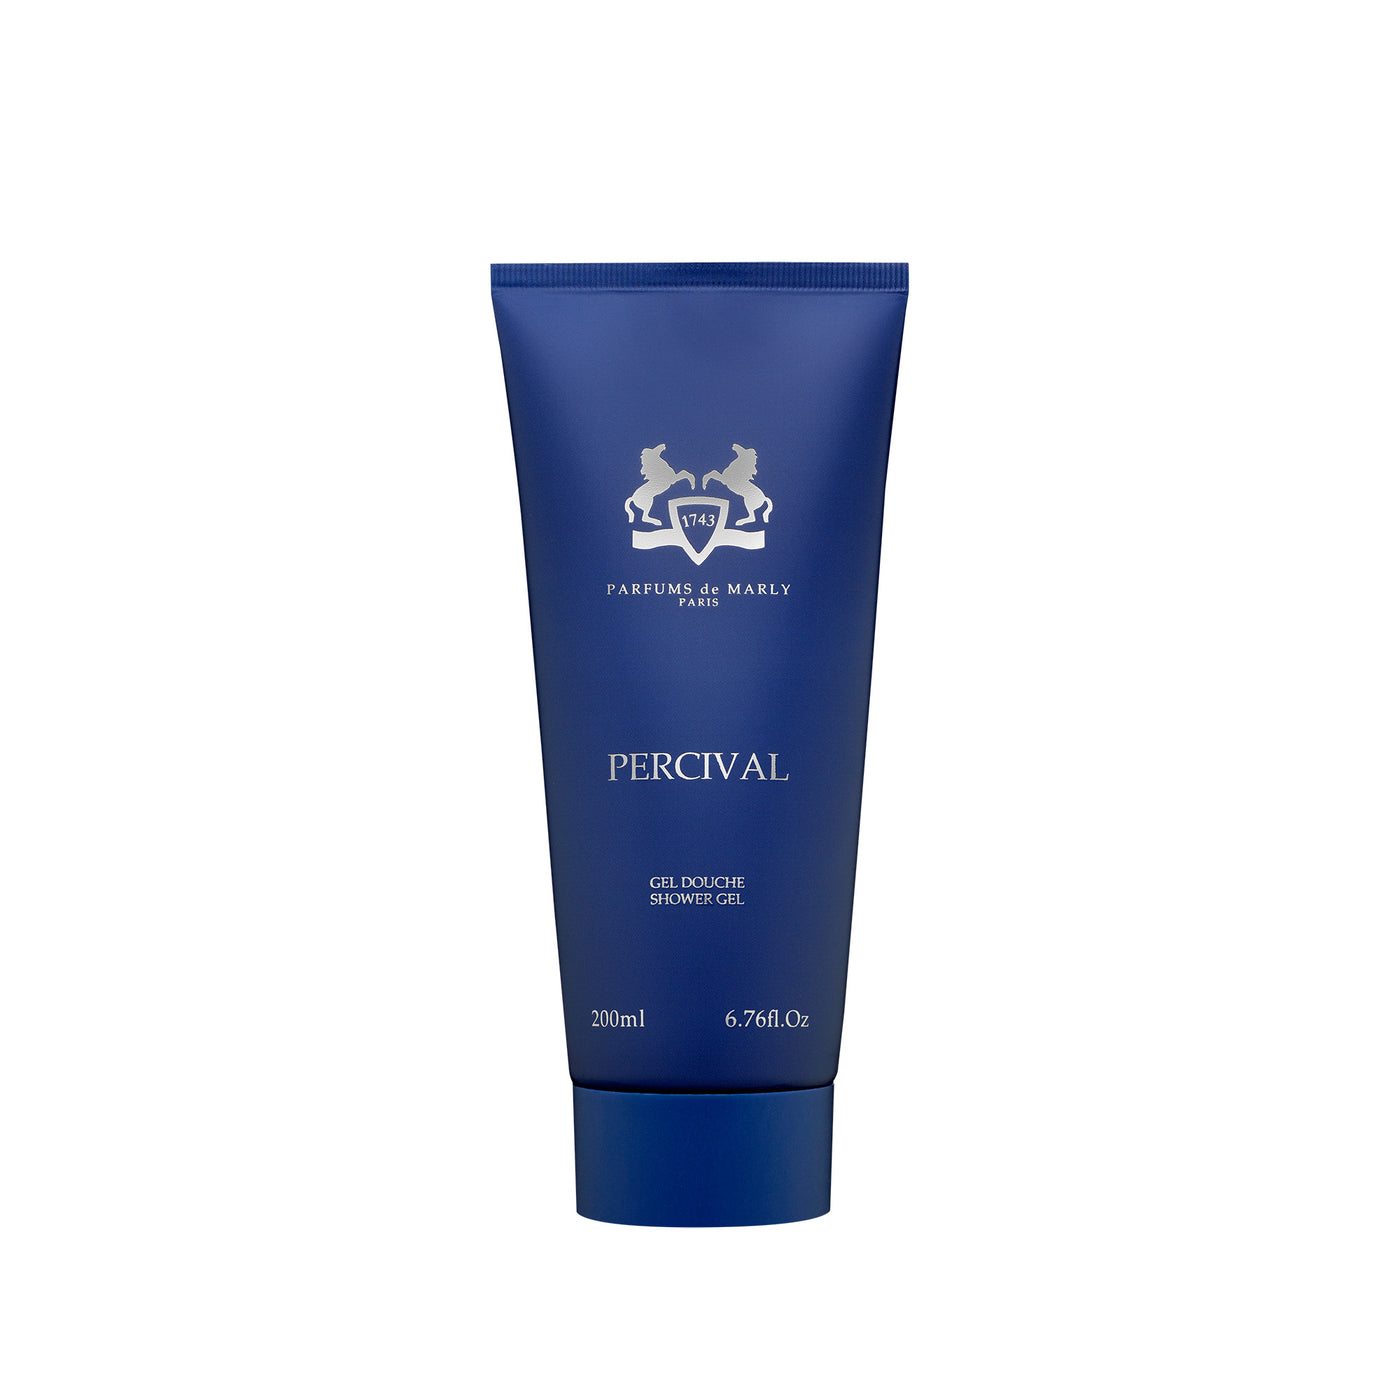 PERCIVAL SHOWER GEL - 200ml - Gharyal by Collectibles 